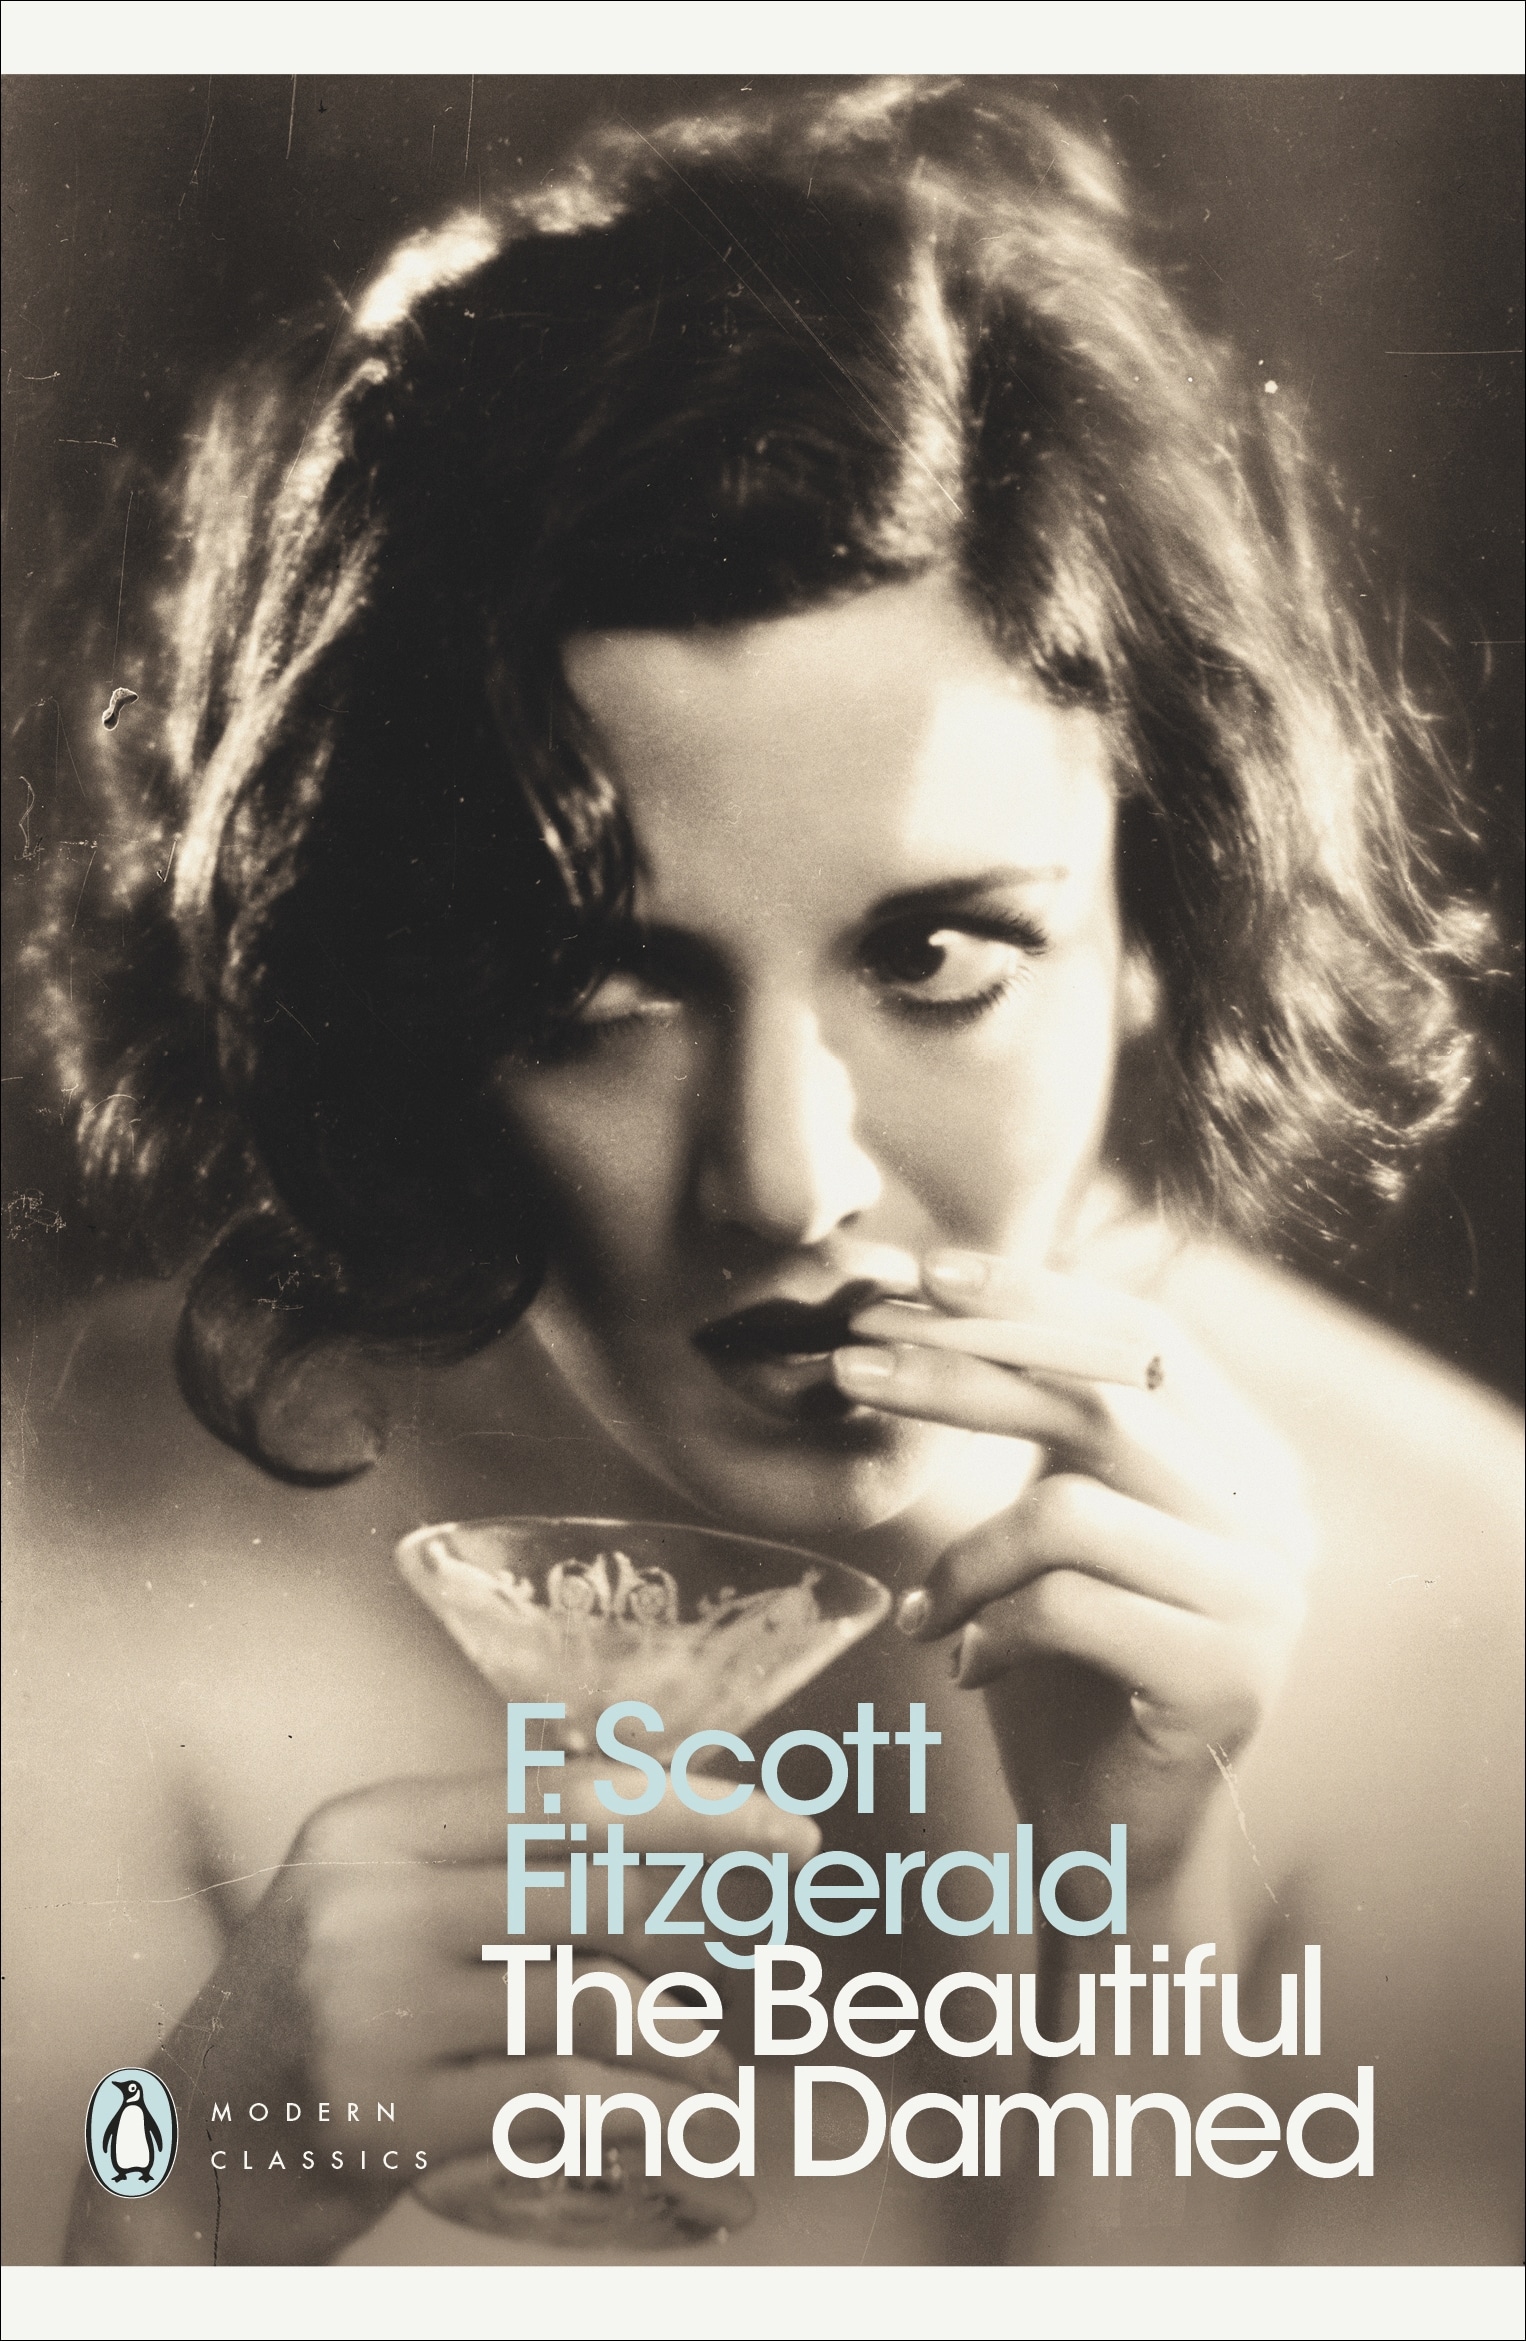 Book “The Beautiful and Damned” by F. Scott Fitzgerald, Geoff Dyer — September 30, 2004